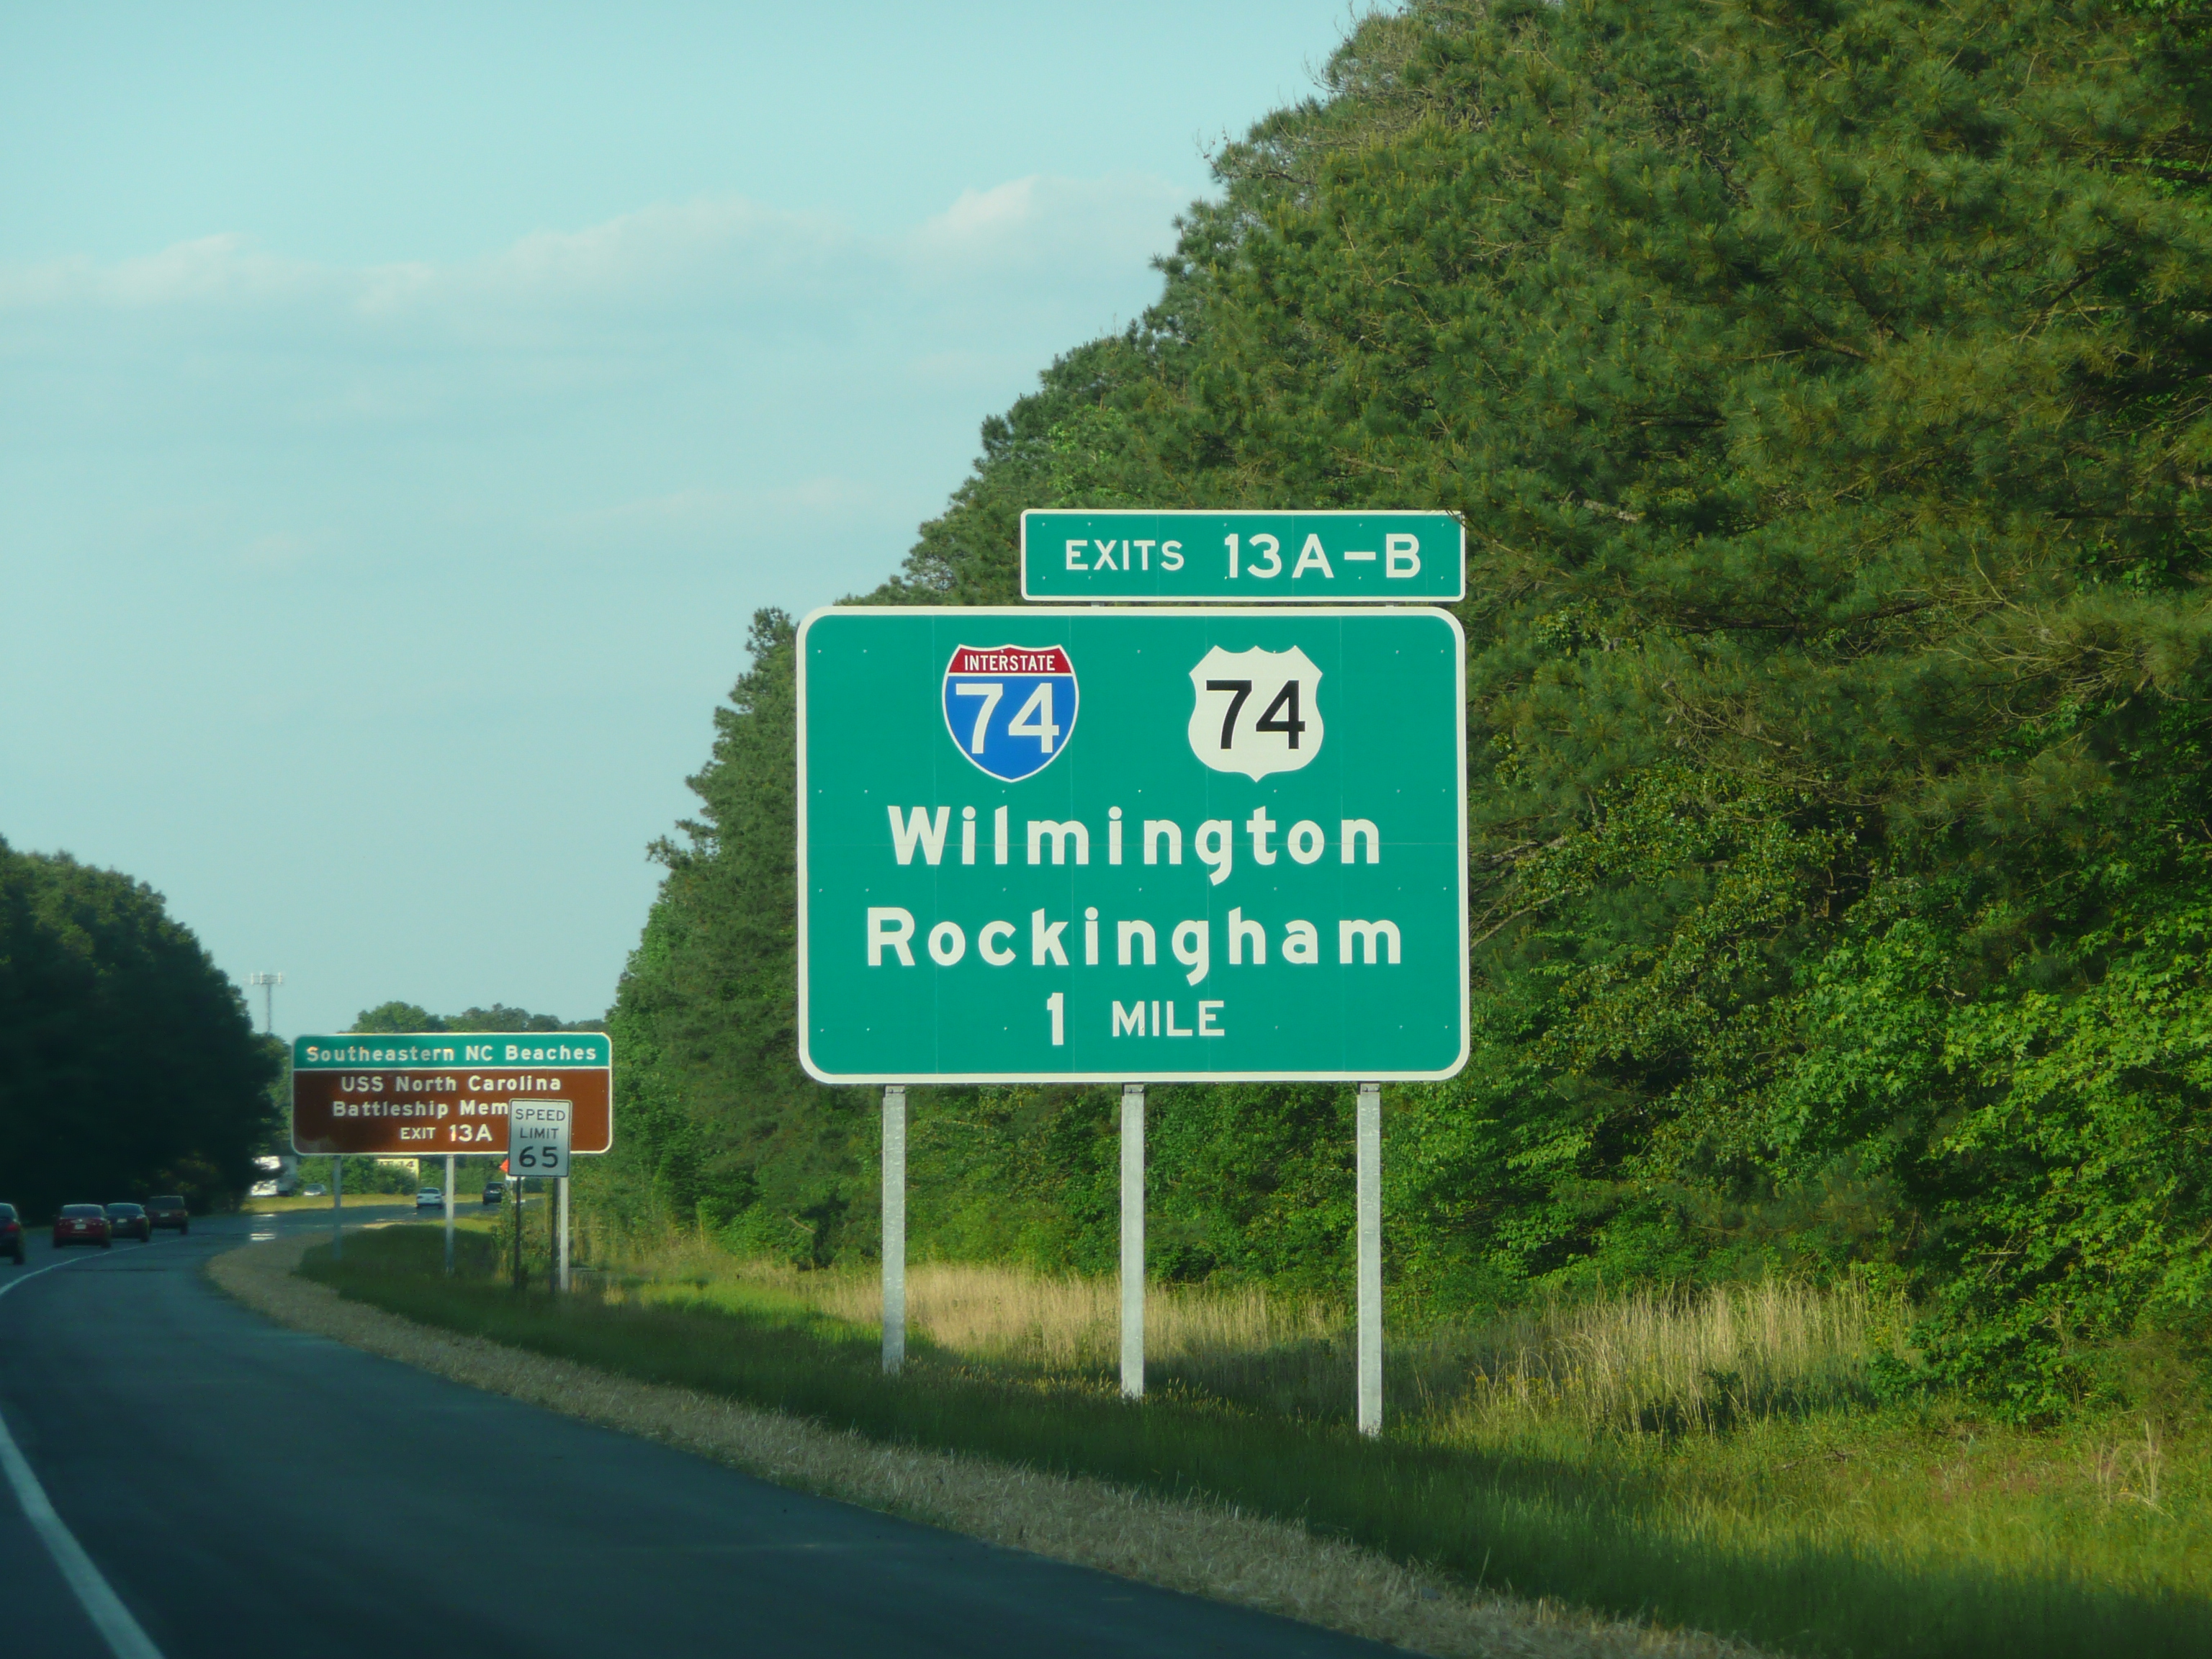 Photo of the 1 mile I-74/US 74 exit sign on I-95 South near Lumberton in May 
2009